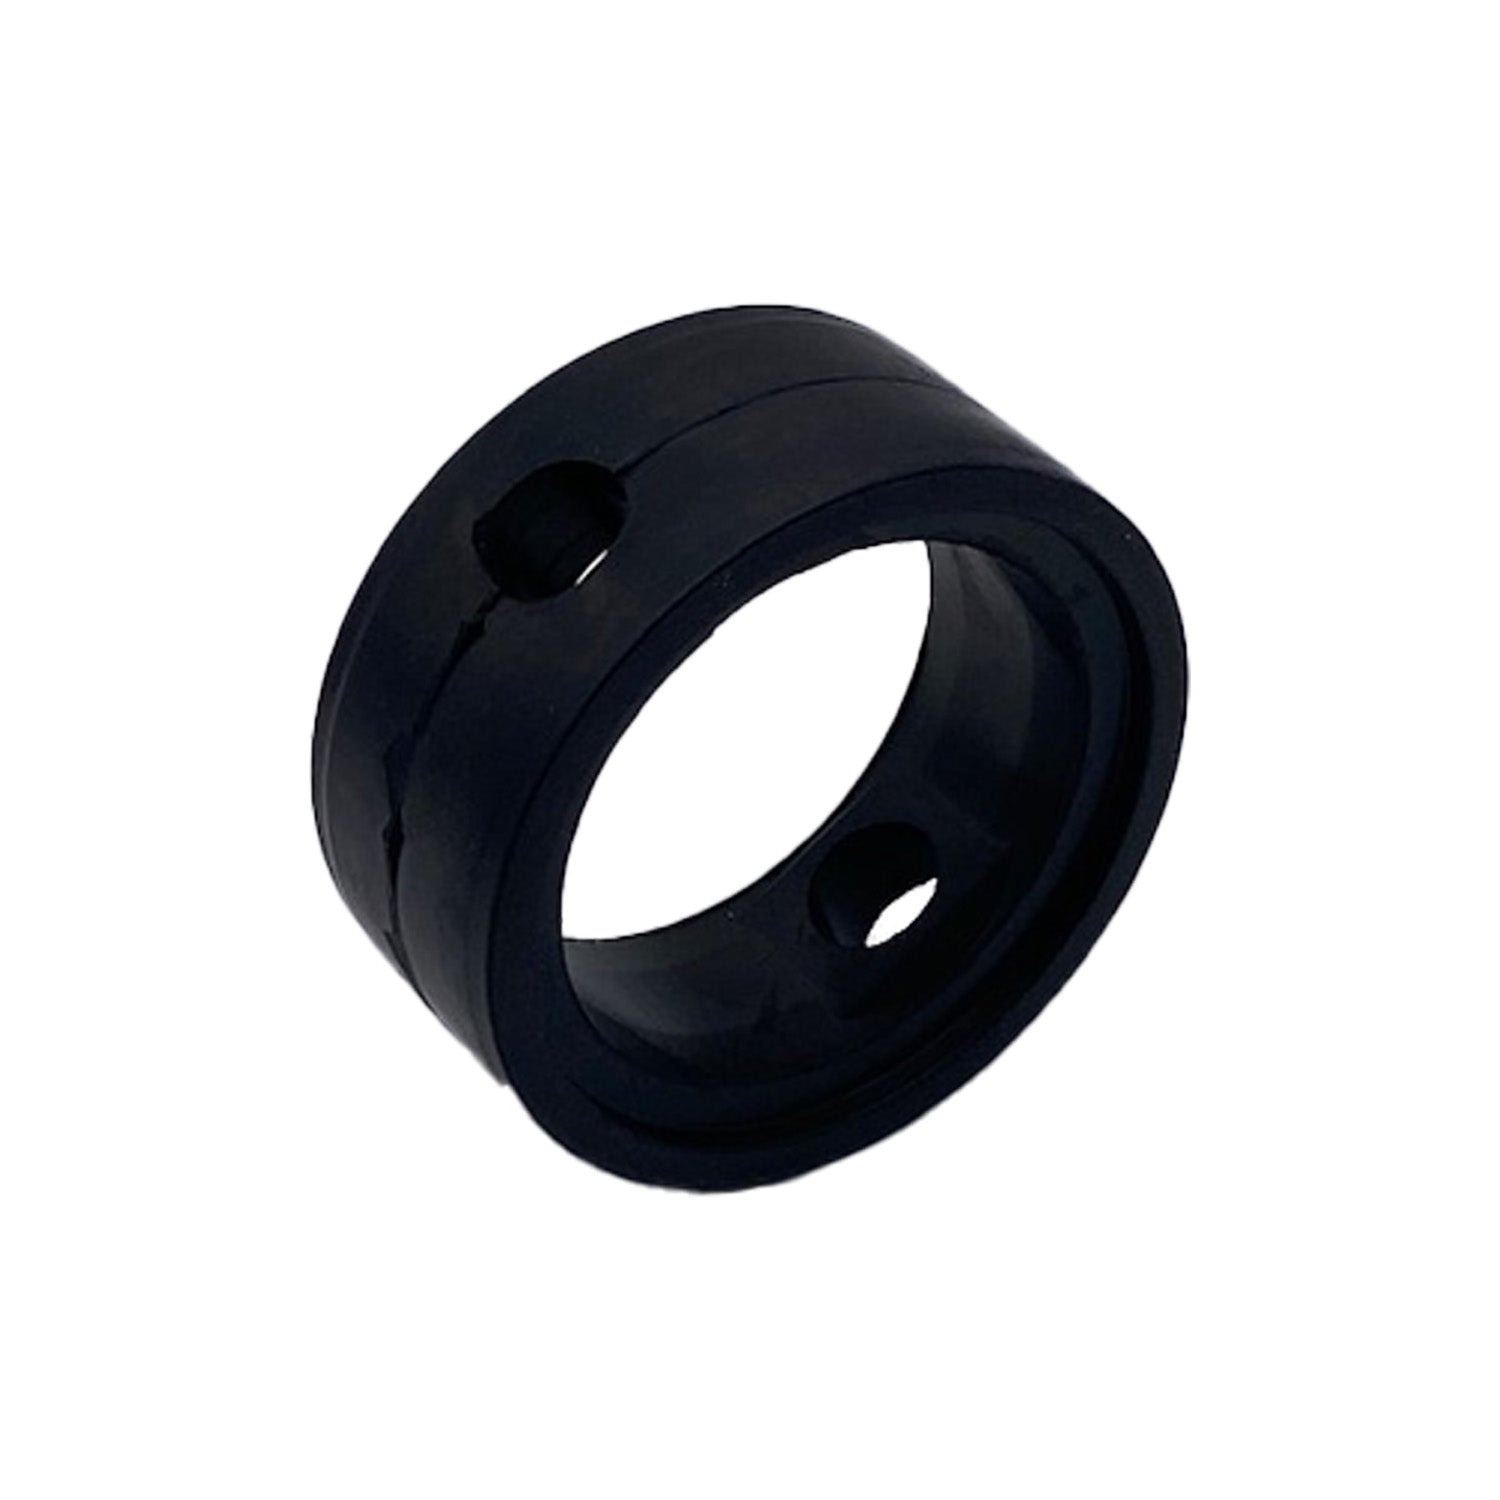 1.5" Butterfly Valve Replacement Seat, EPDM (Black)